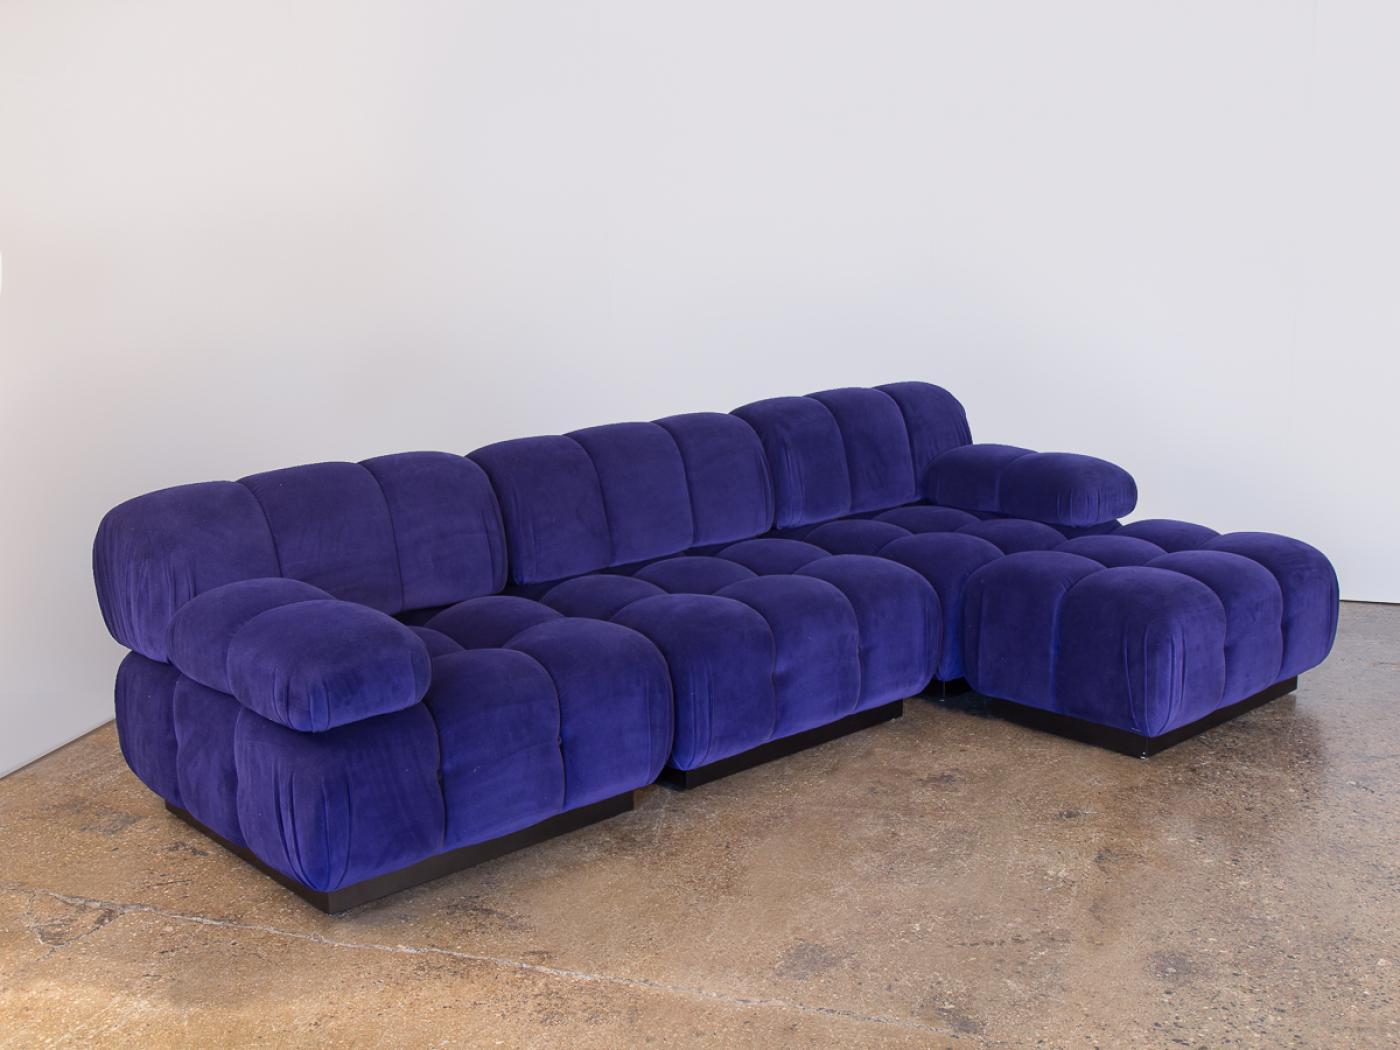 OAM Design Studio presents our first in a line of custom contemporary design sofas. The Modular Tufted Sofa is a luxurious form crafted with deep tufted cushions for supreme comfort. Our design is inspired by the opulence of 1970s Italian and